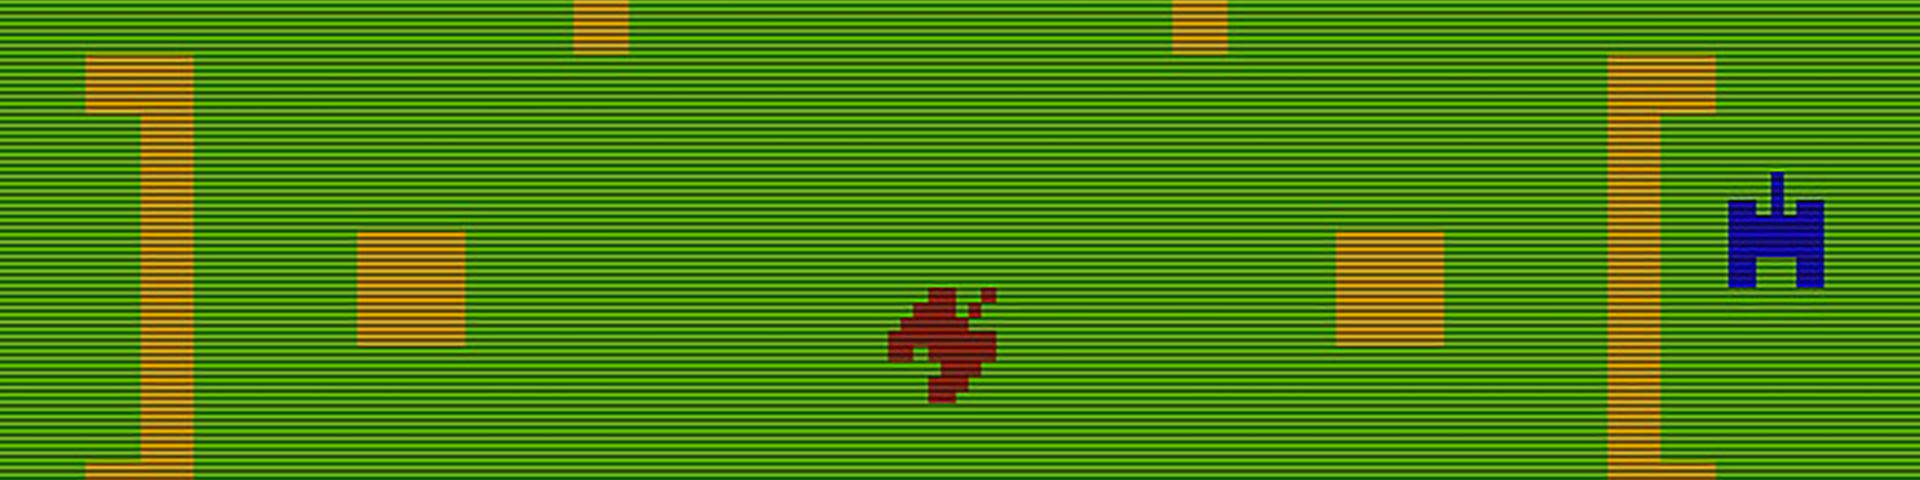 A 8-bit red tank faces off against a blue tank on a green battle field. Yellow barriers divide them.